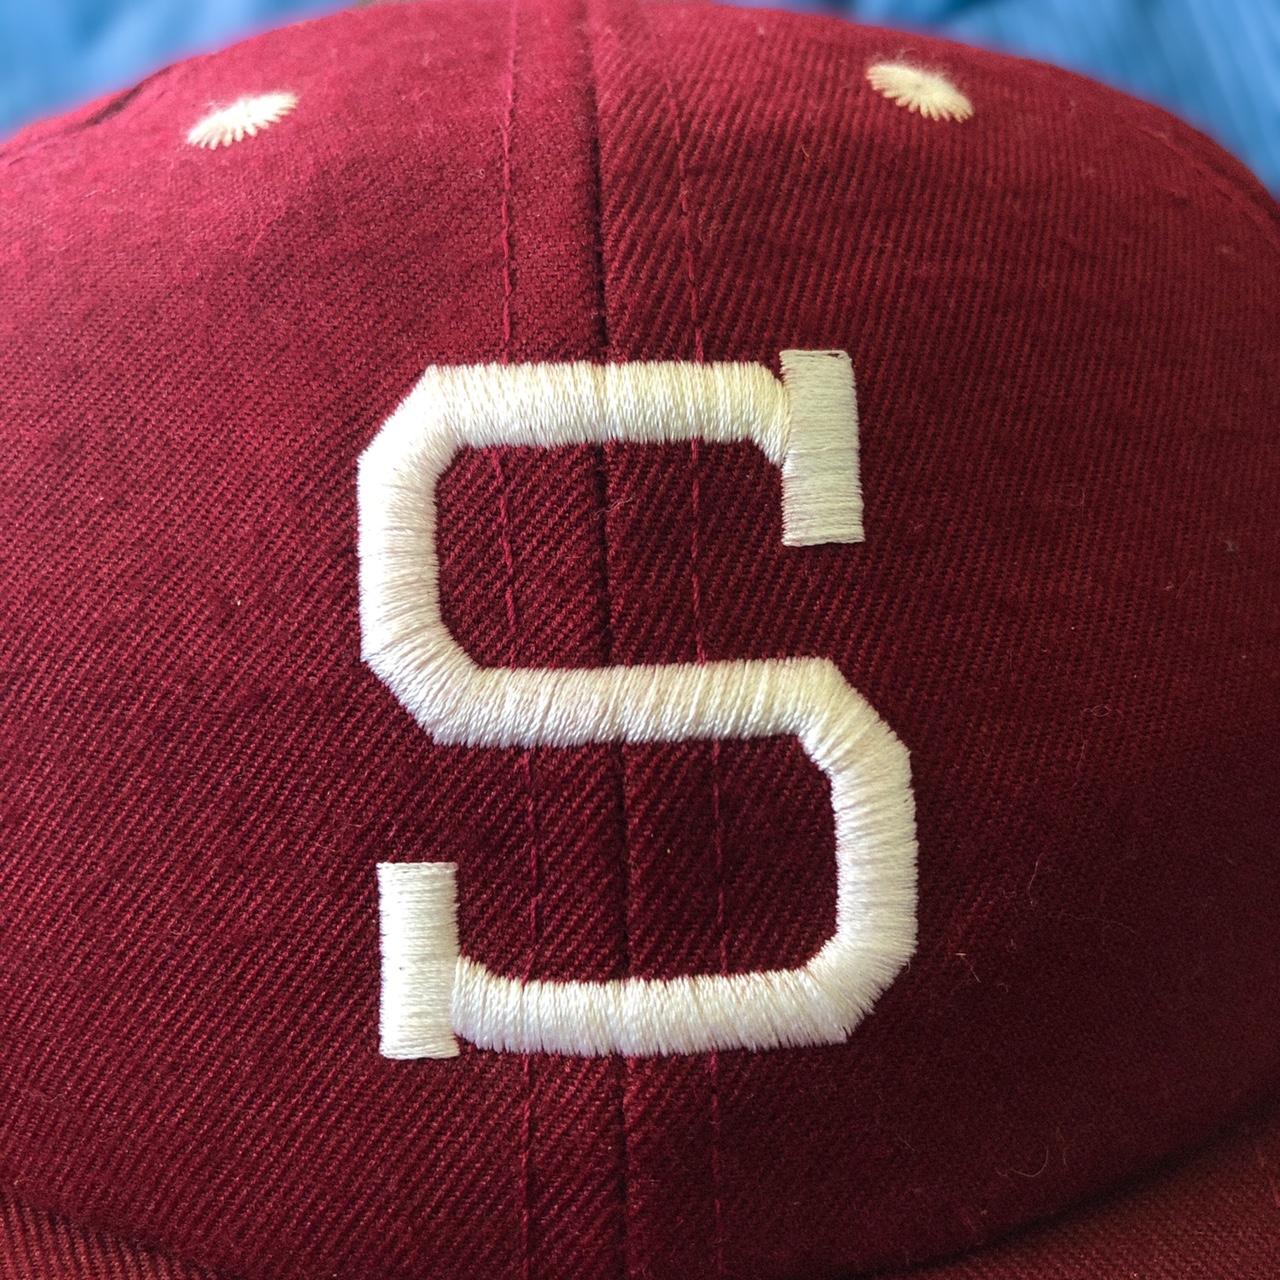 Vintage “S” hat - Sizes 7 1/4 and down - Maroon and... - Depop